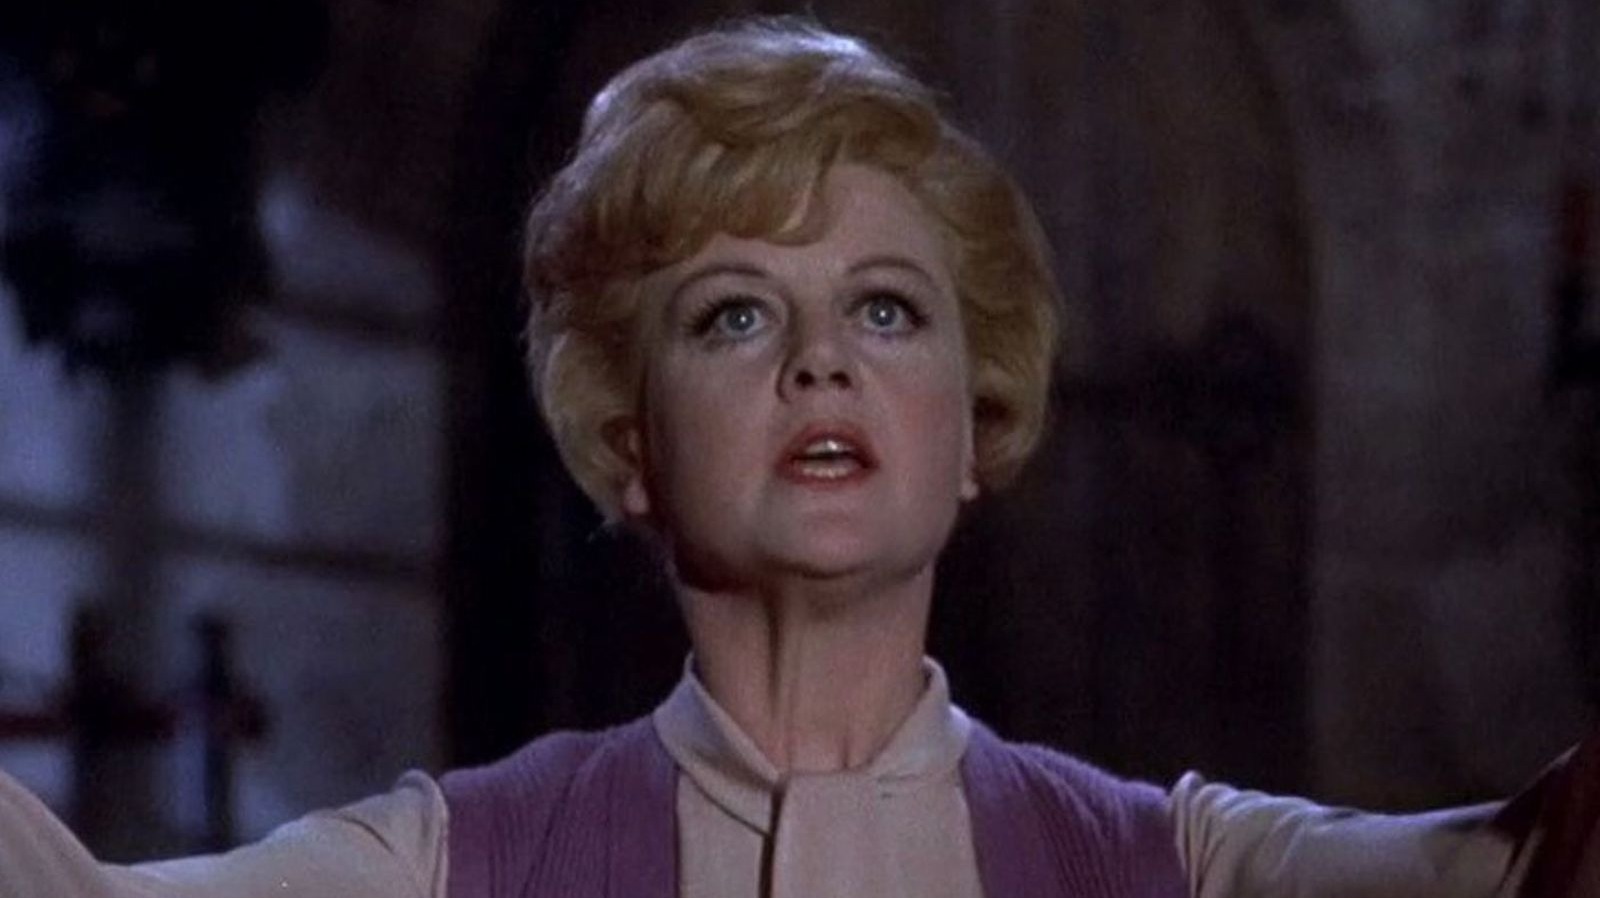 Angela Lansbury left Los Angeles to save her children from the influence of Charles Manson